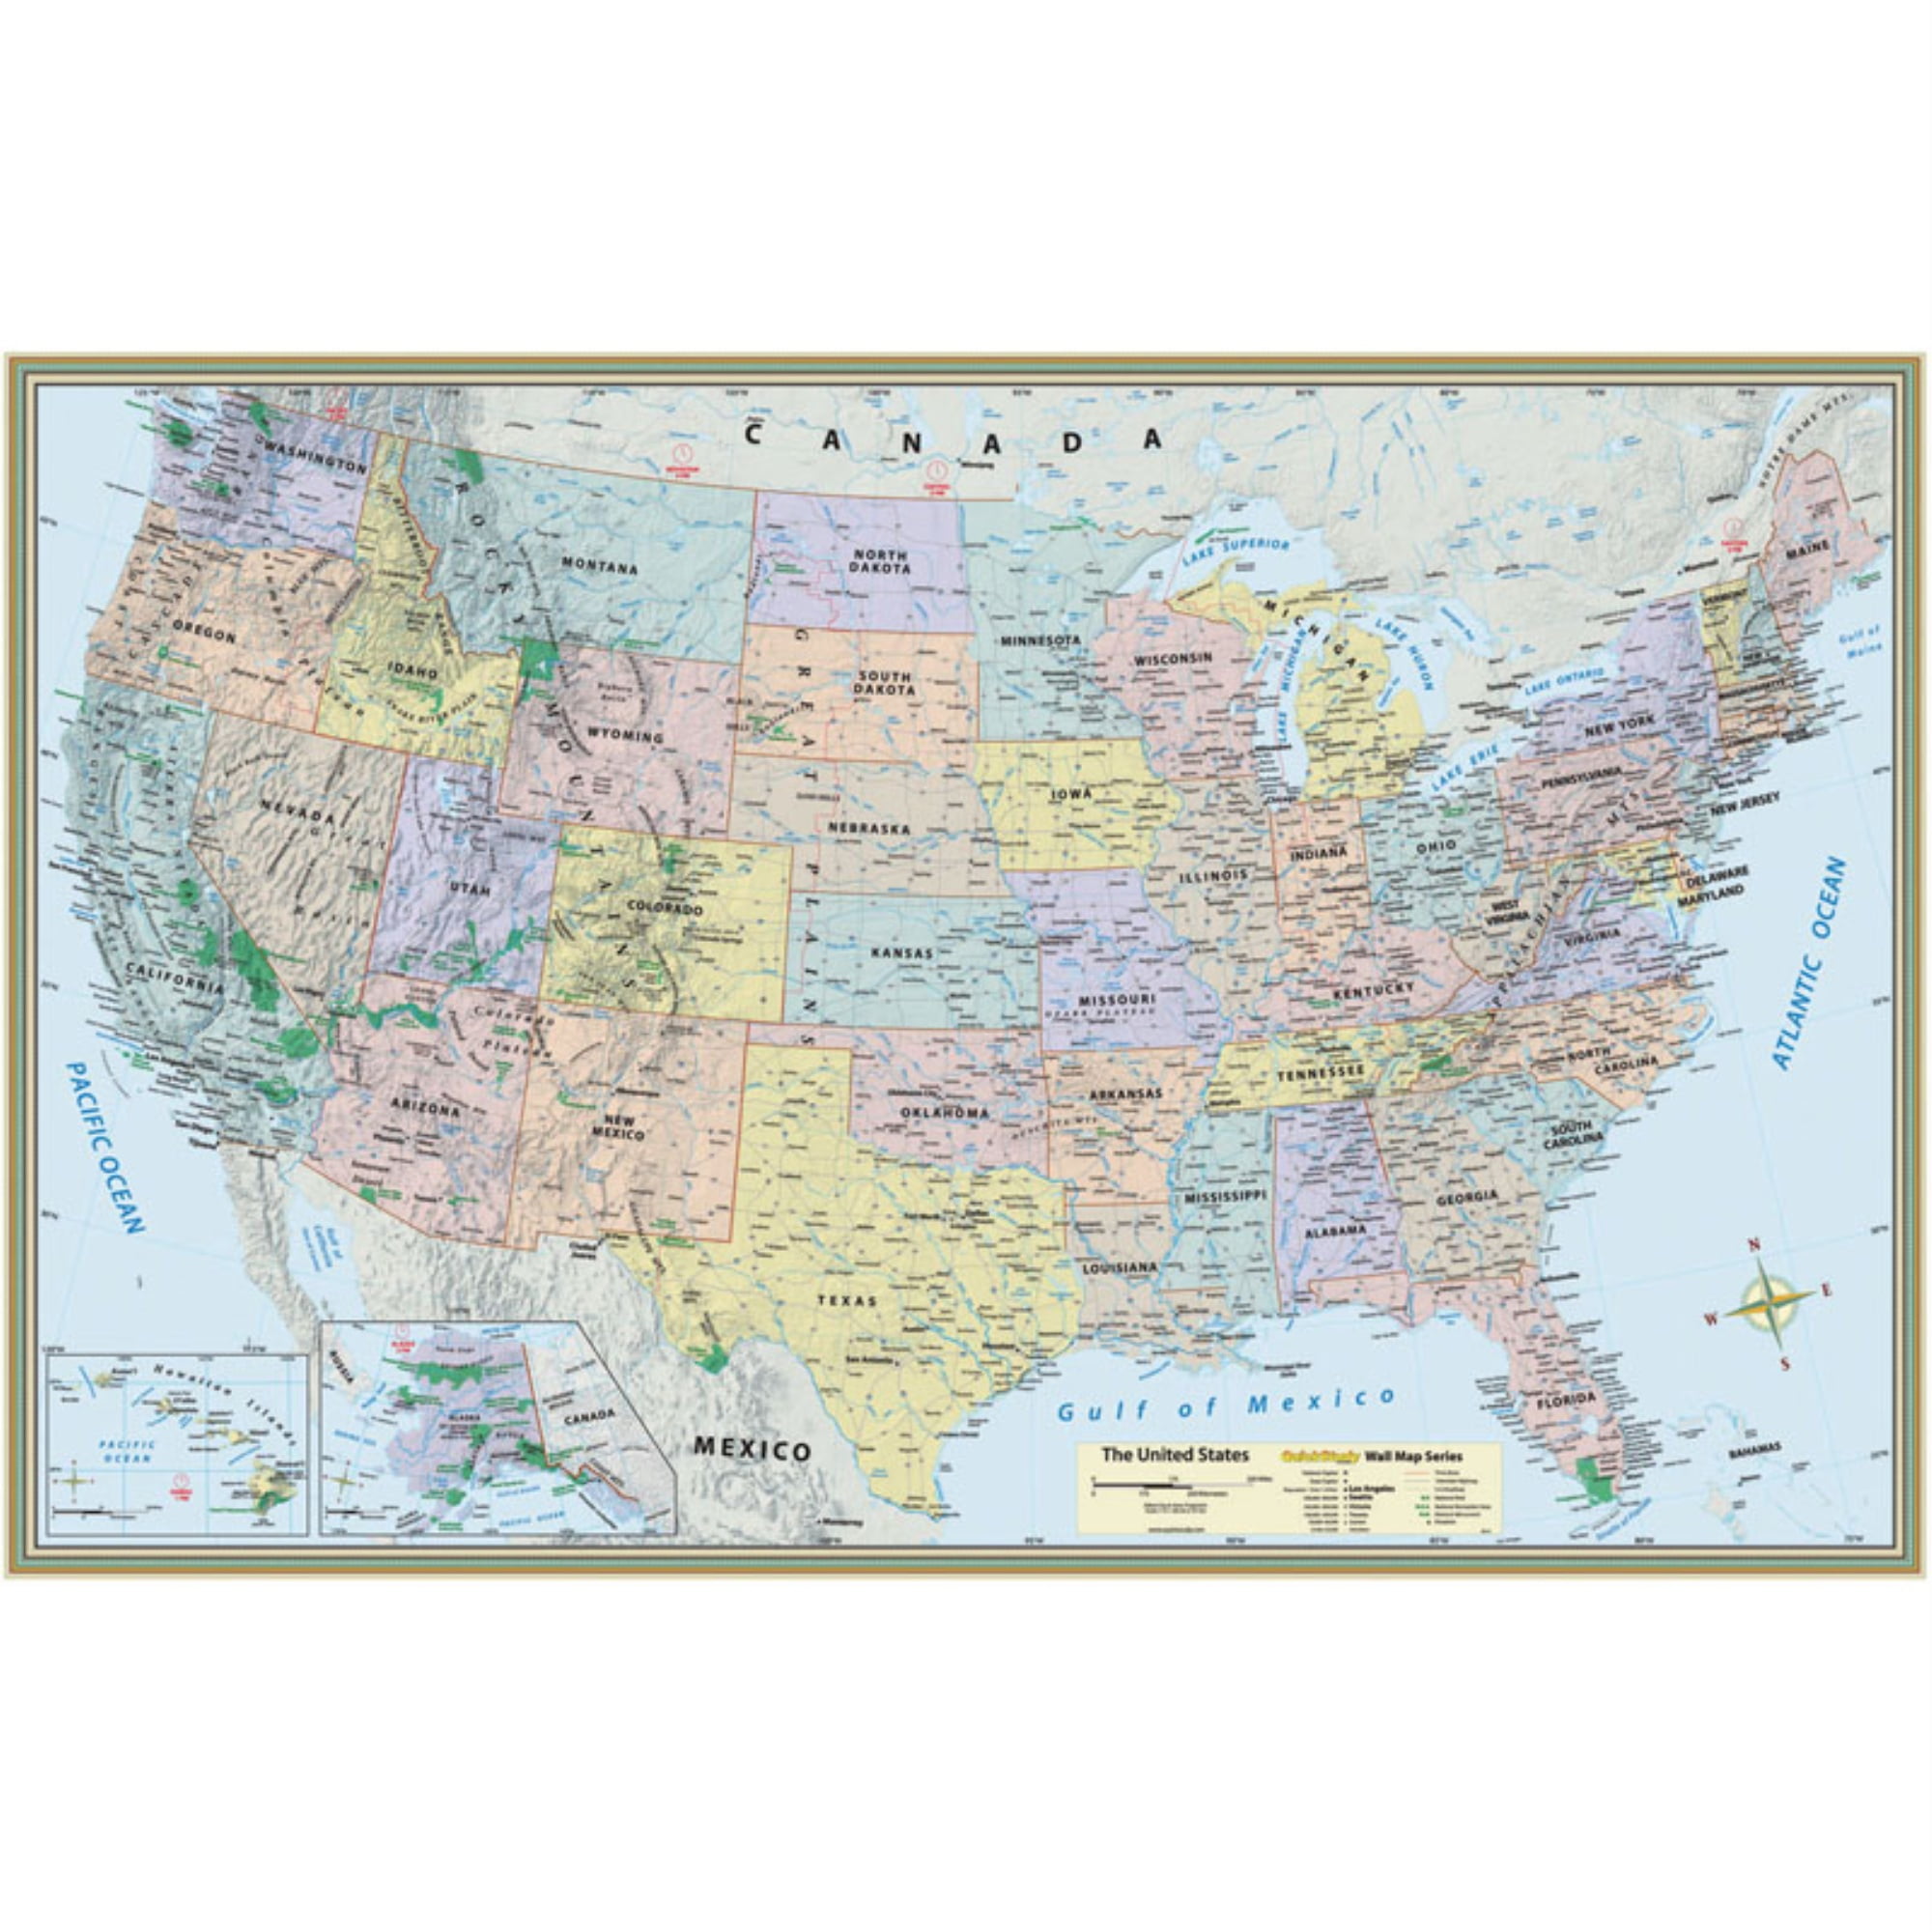 24x36 United States Paper Rolled USA Classic Elite Wall Map Mural Poster 